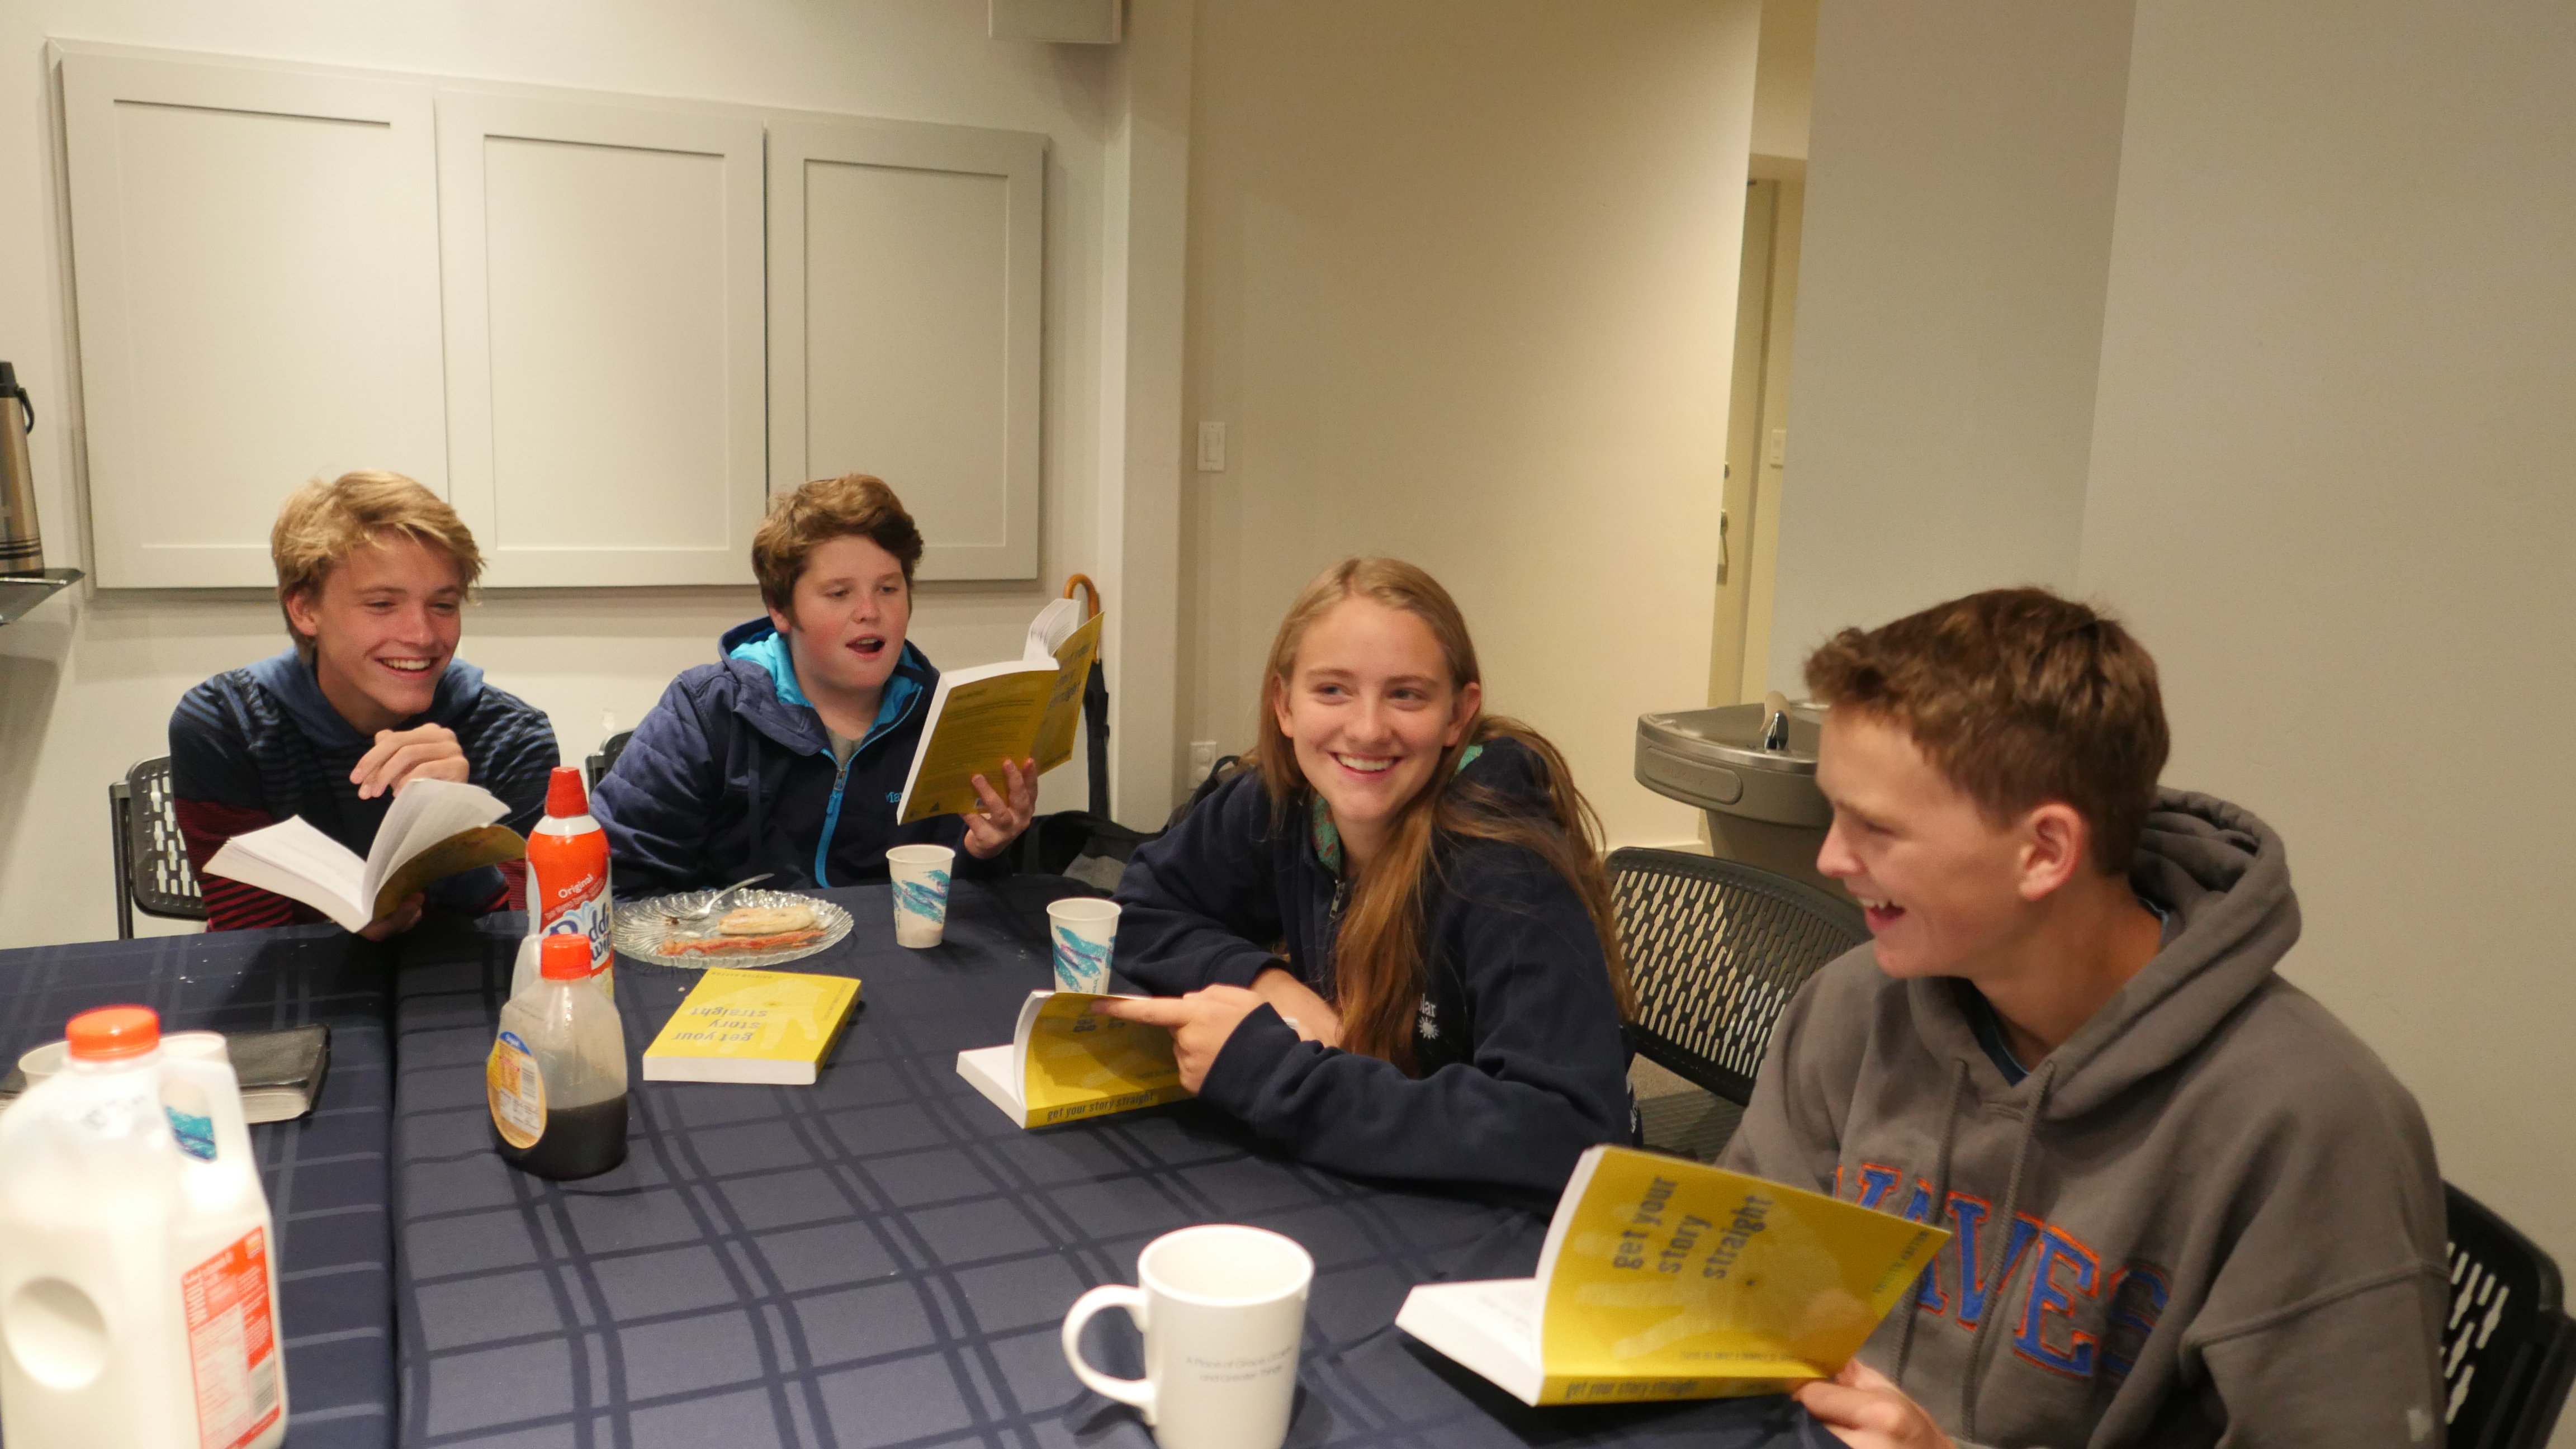 Aspen, Colorado teens Getting Their Story Straight over breakfast together.